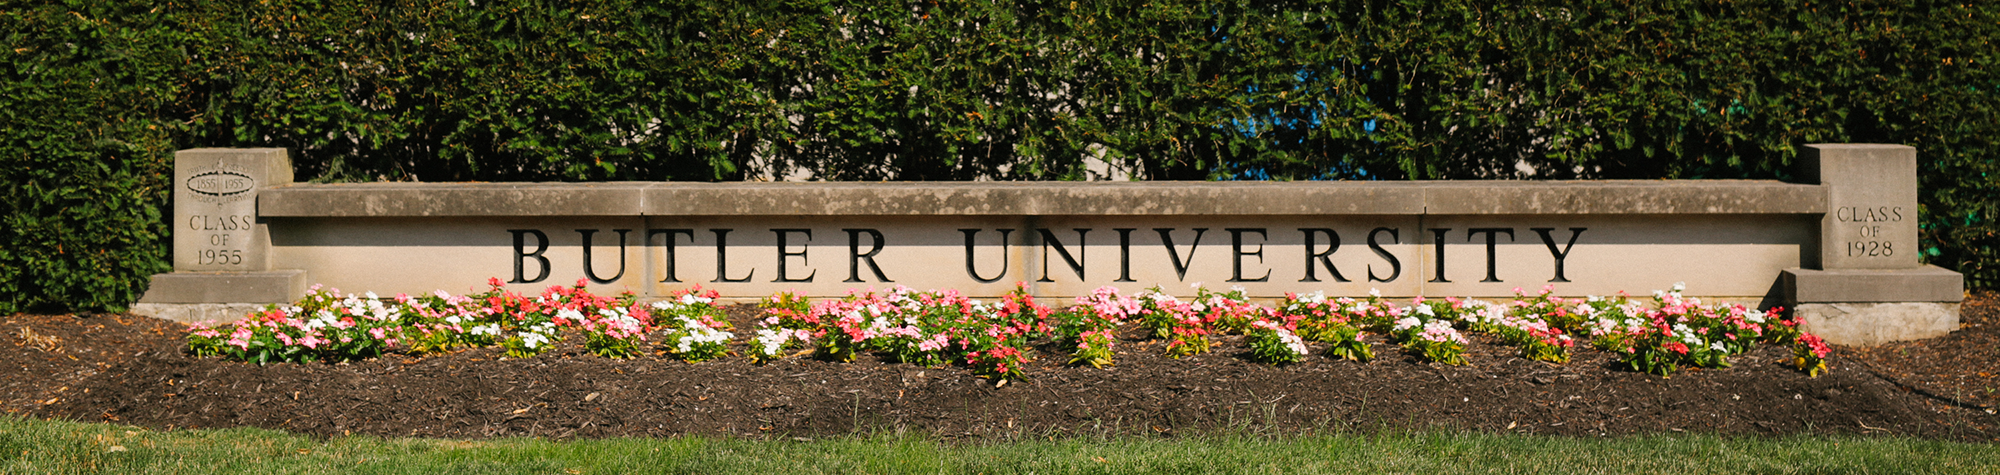 low stone wall with Butler University engraved and flowers in front